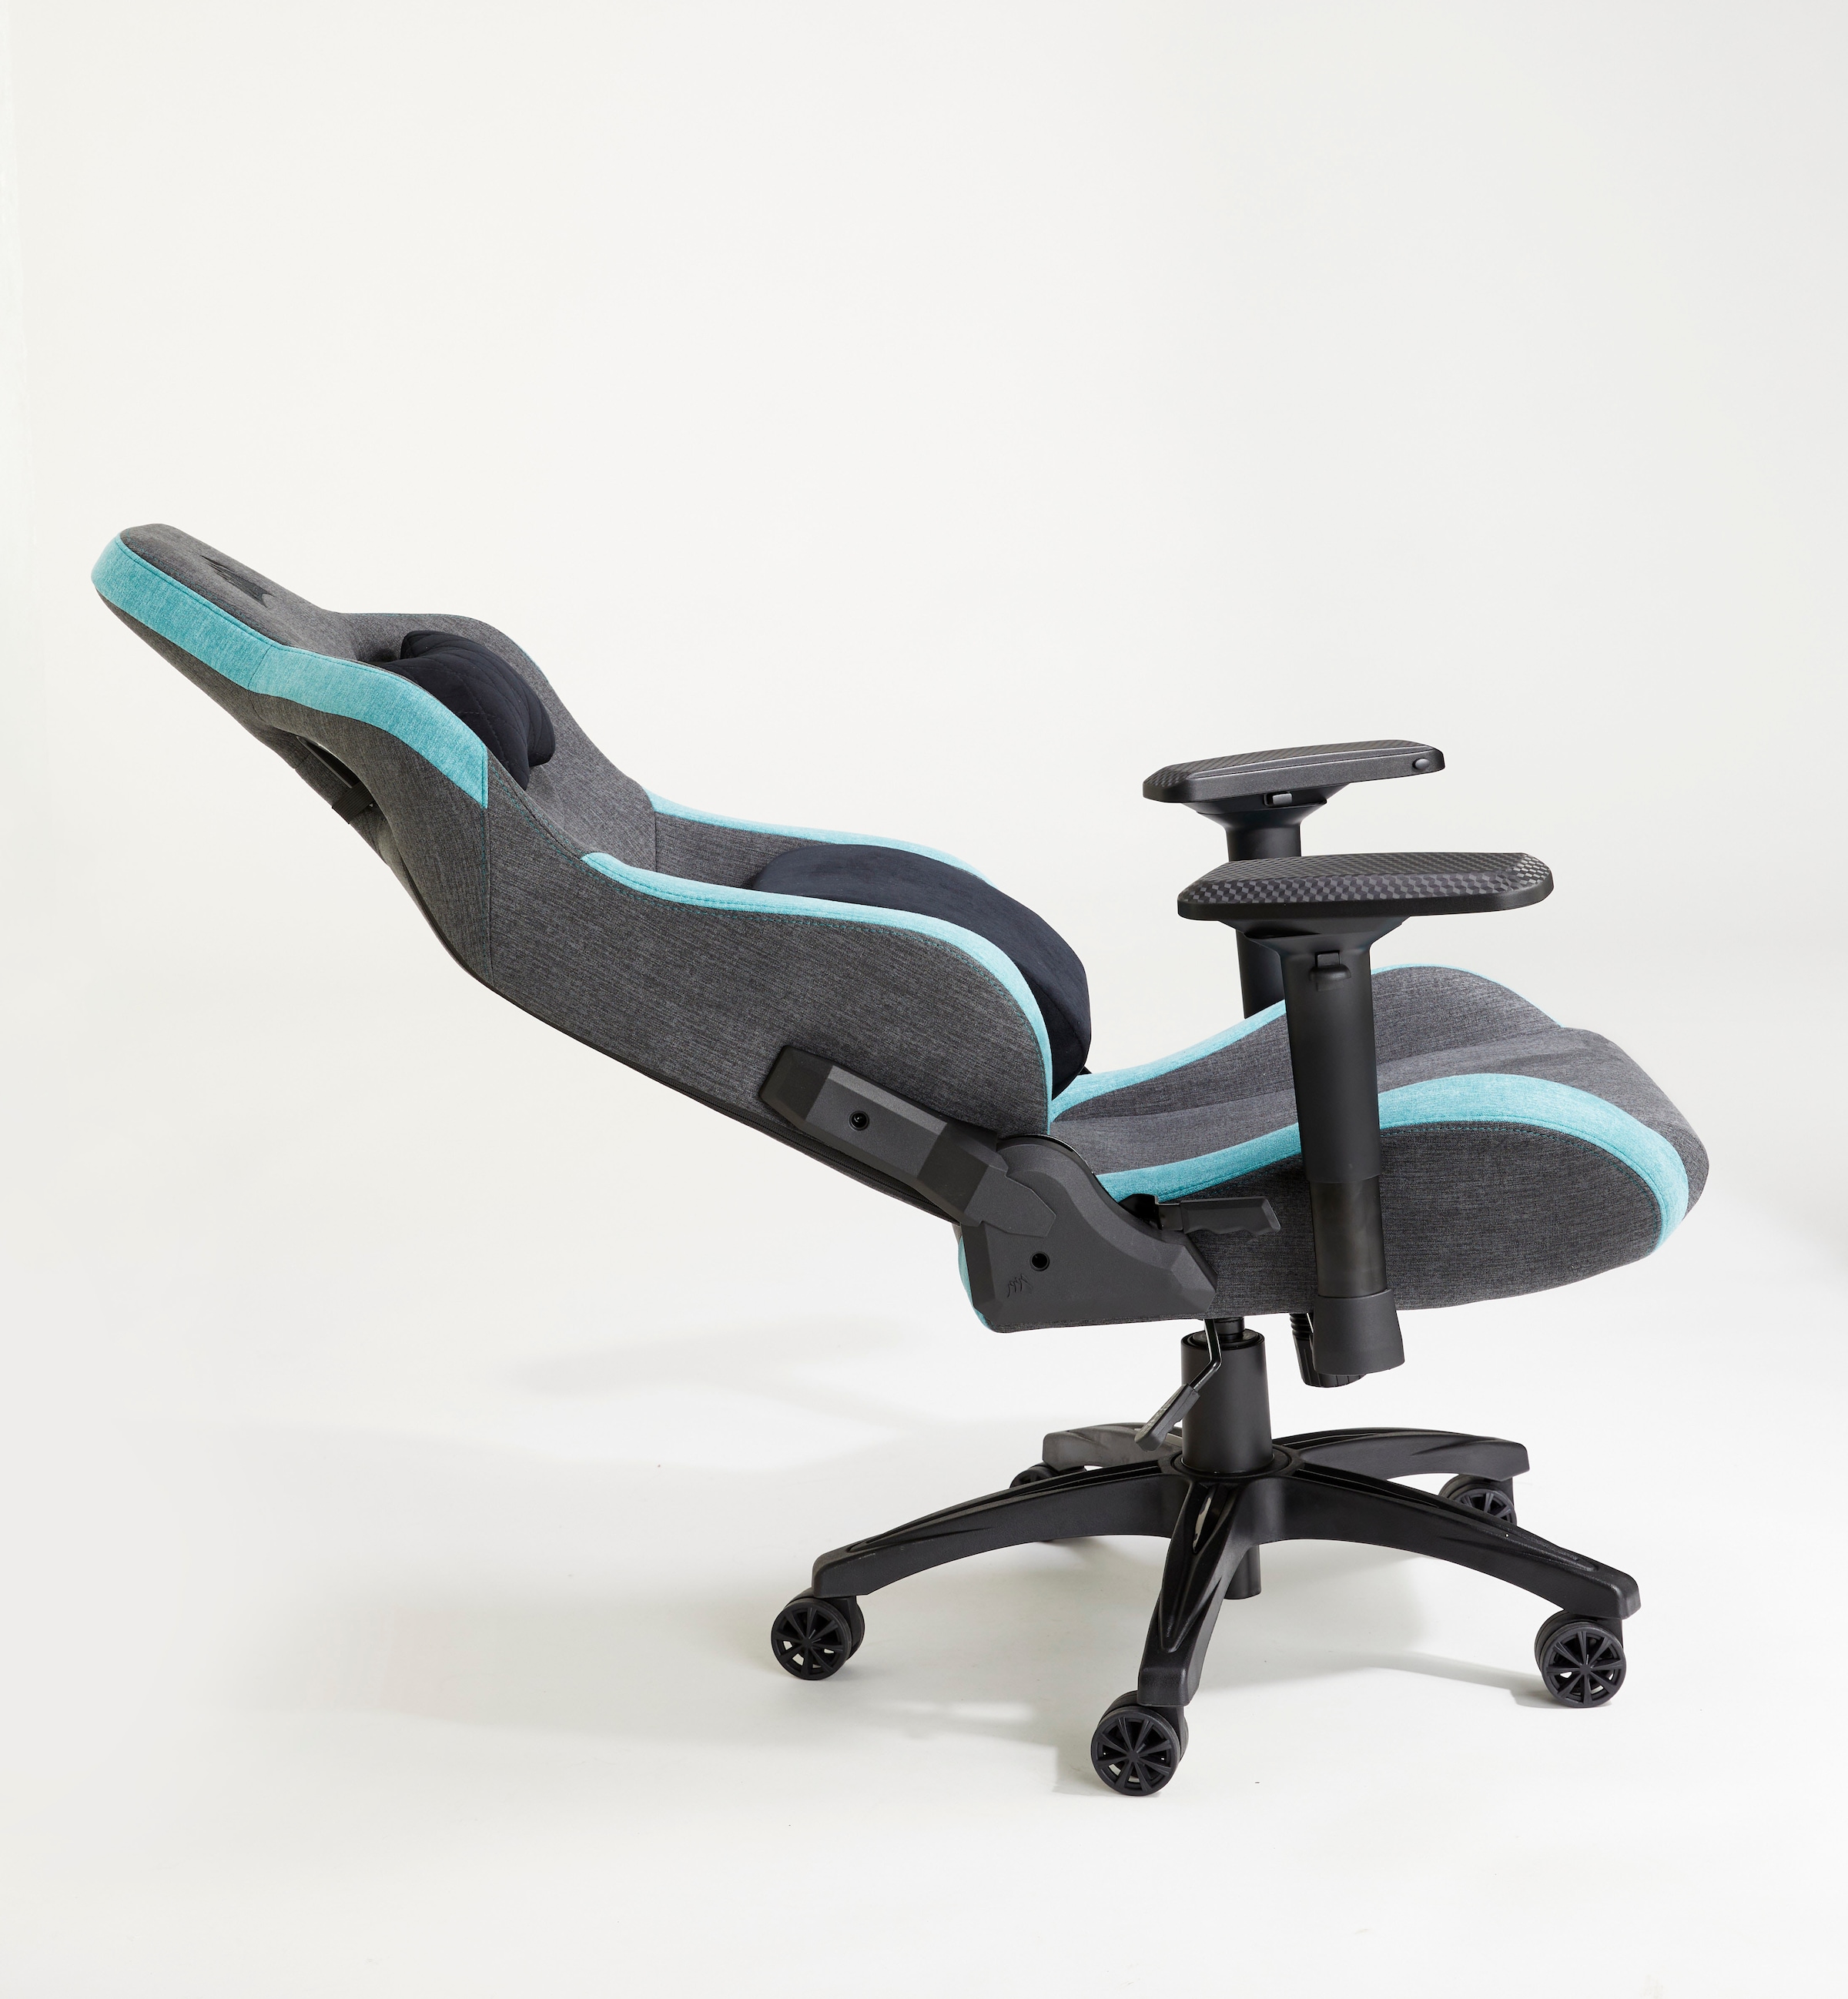 Fabric Design, UNIVERSAL Chair«, Exterior Gaming online »T3 Racing-Inspired bei Chair Soft Corsair Fabric Rush Gaming